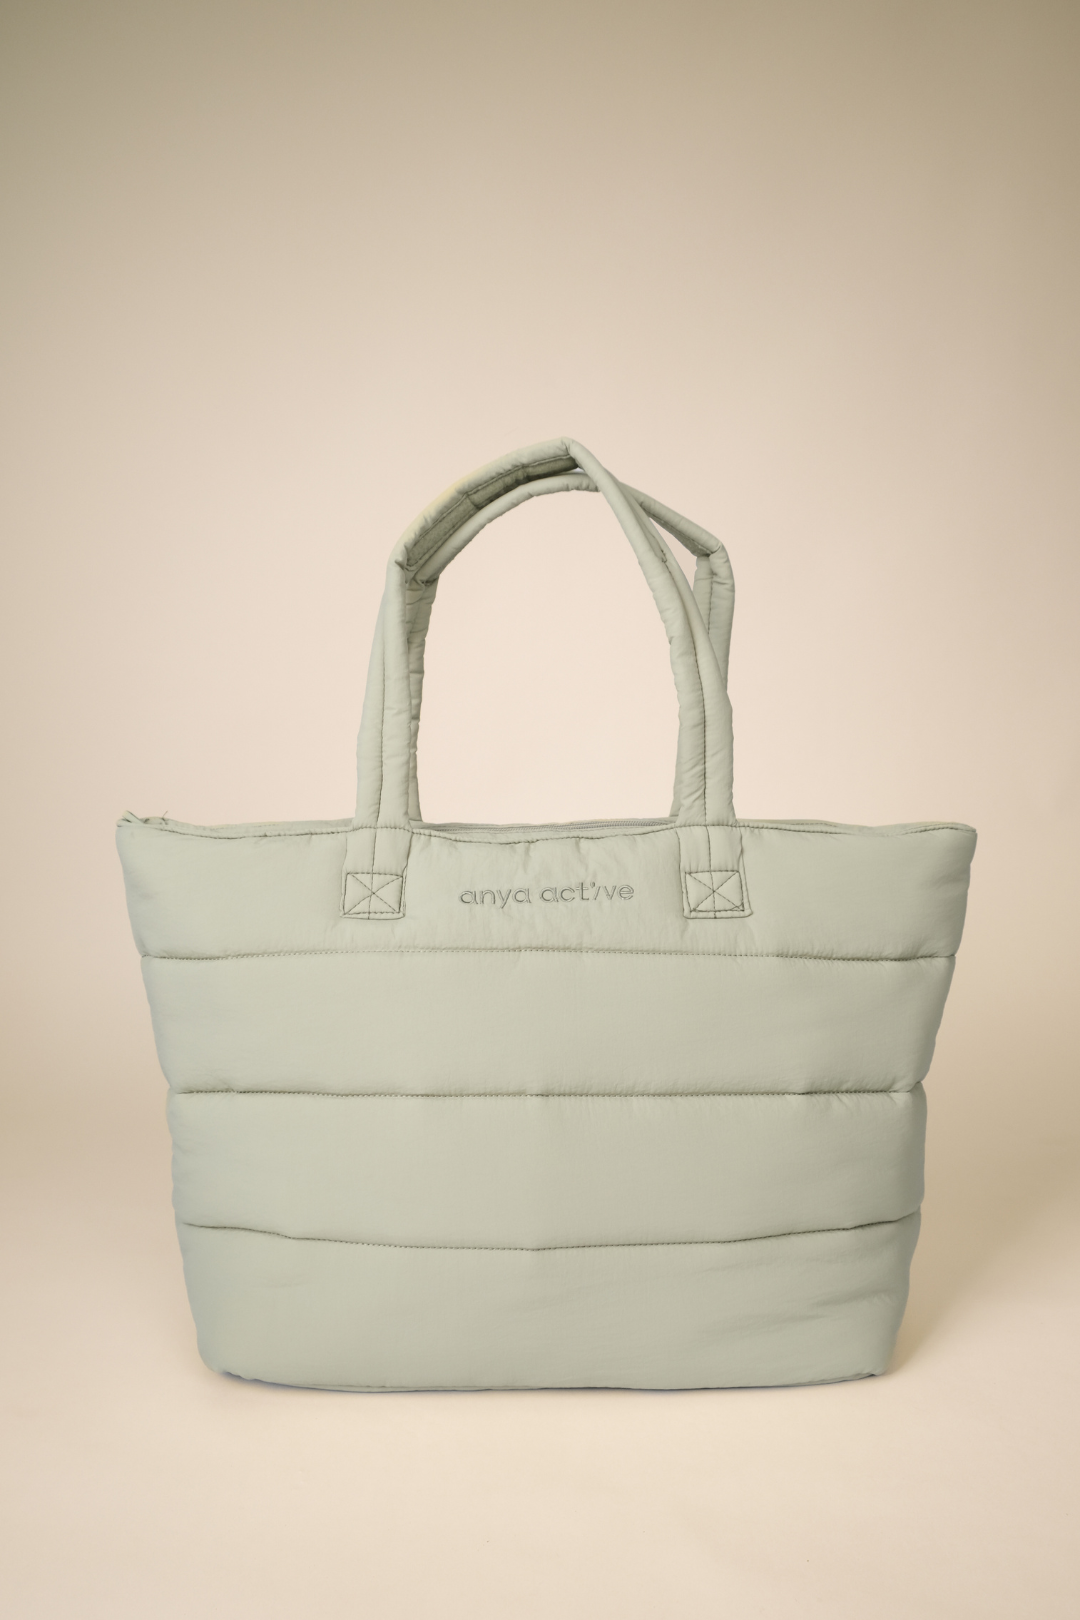 The Oversized Plush Tote in Matcha Latte